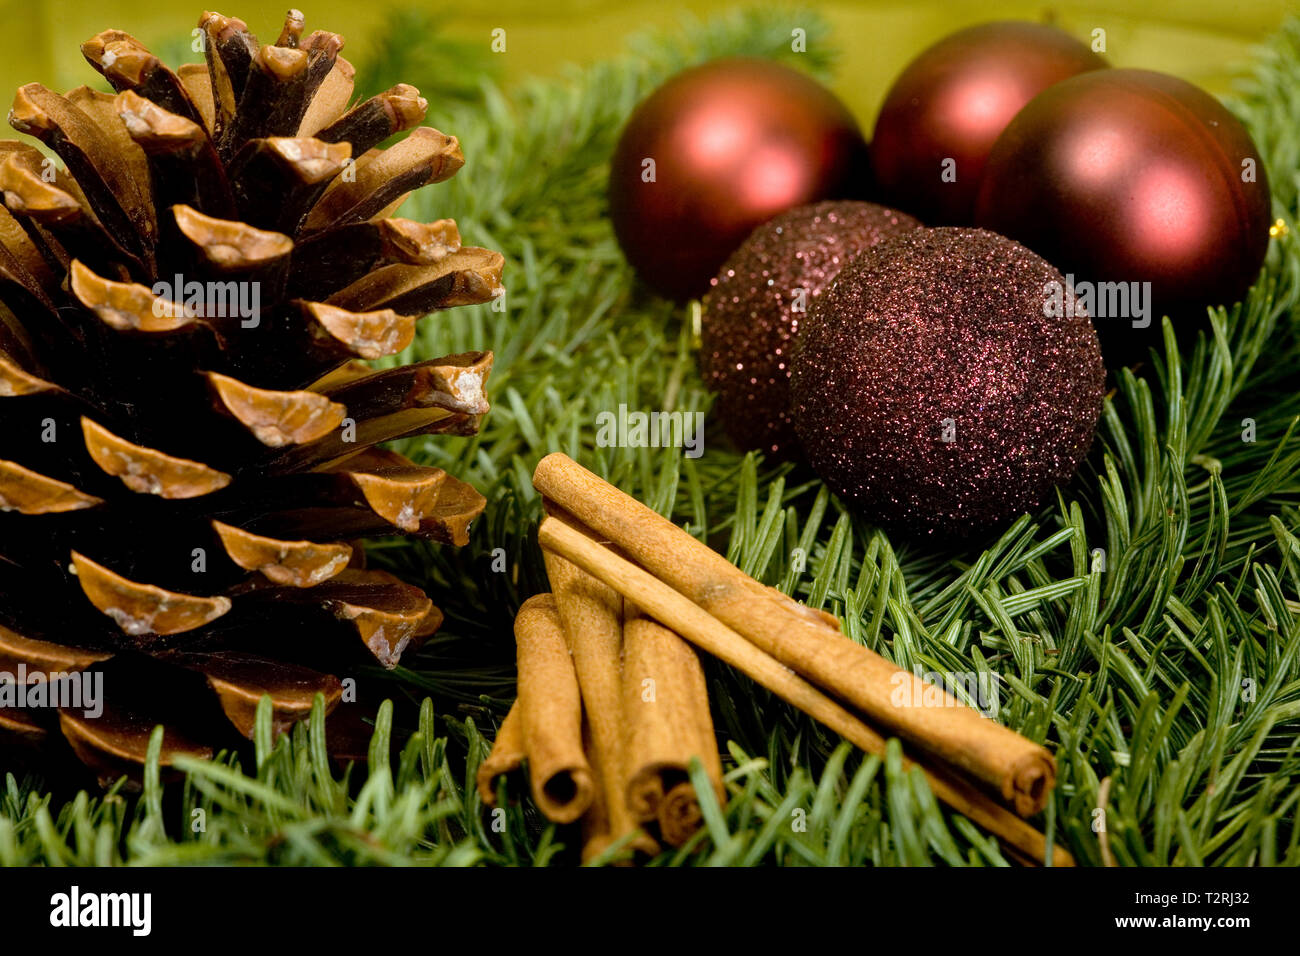 Christmas decoration with fir cones, cinnamon sticks and Christmas balls. Pretty arranged on green fir branches. Stock Photo